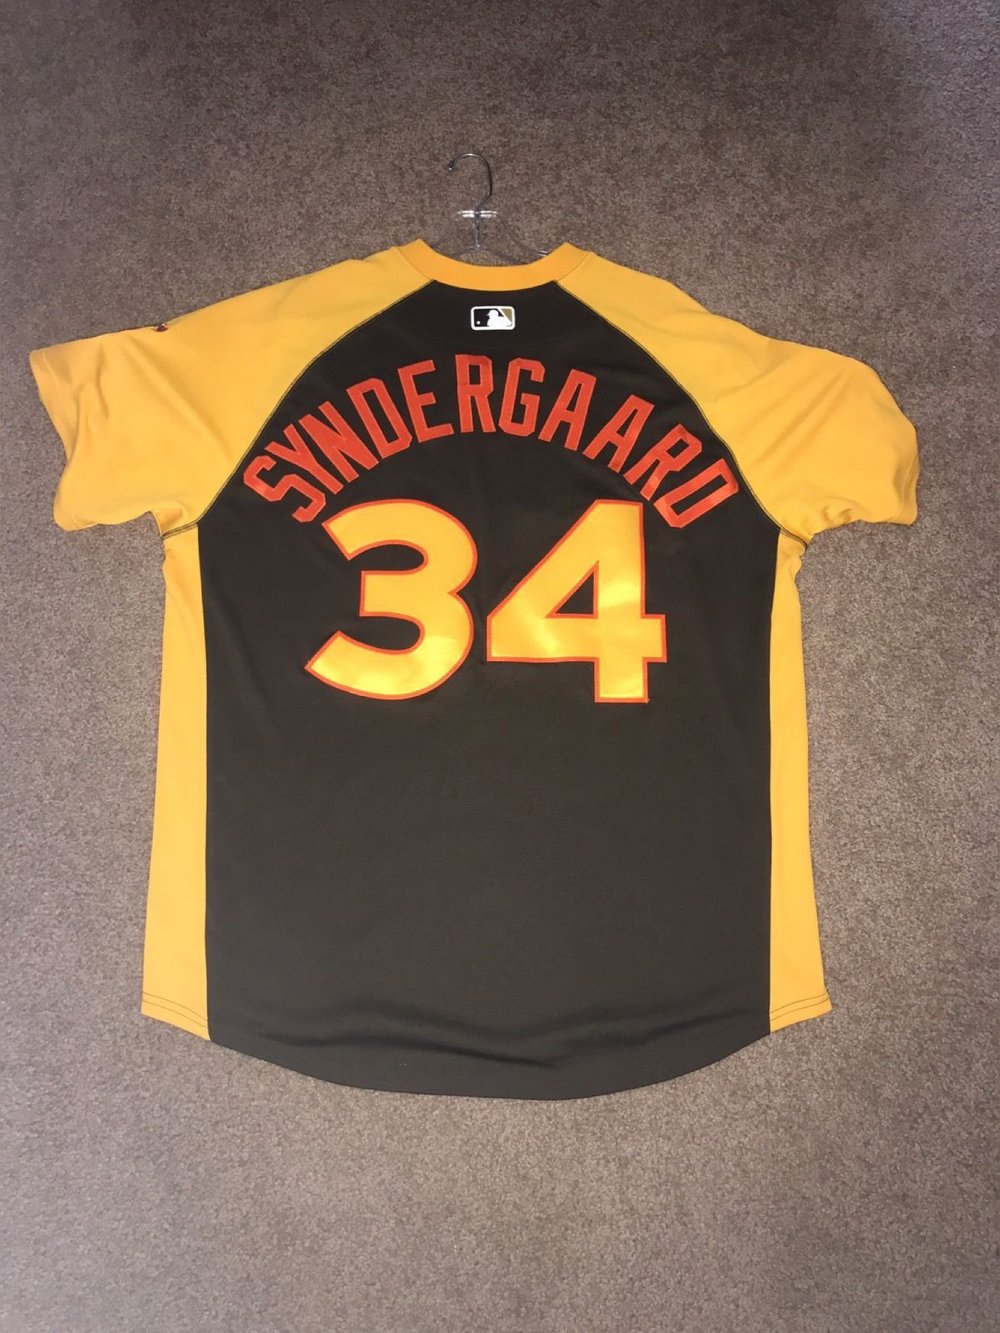 national all star jersey